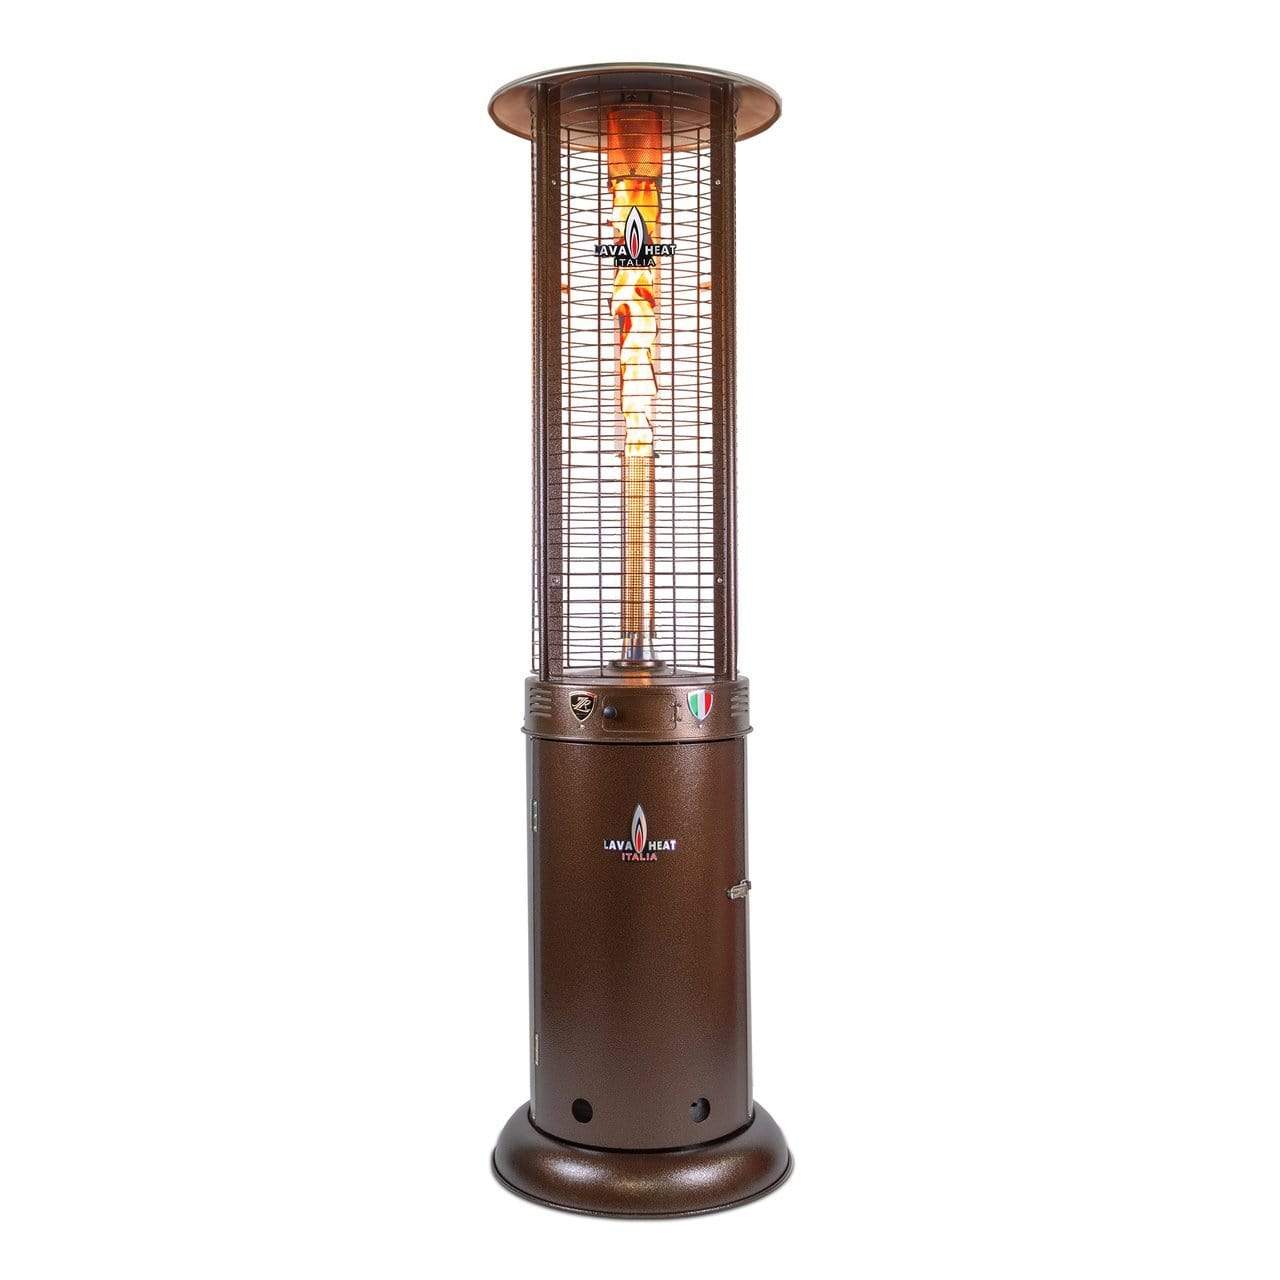 Lava Heat Italia Patio Heater Propane / Heritage Bronze / Assembled The OPUS Round Flame Tower Heater, 80.5", 56,000 BTU, Remote Control, Push Button Ignition, Hammered Black, Heritage Bronze - Liquid Propane OR Natural Gas